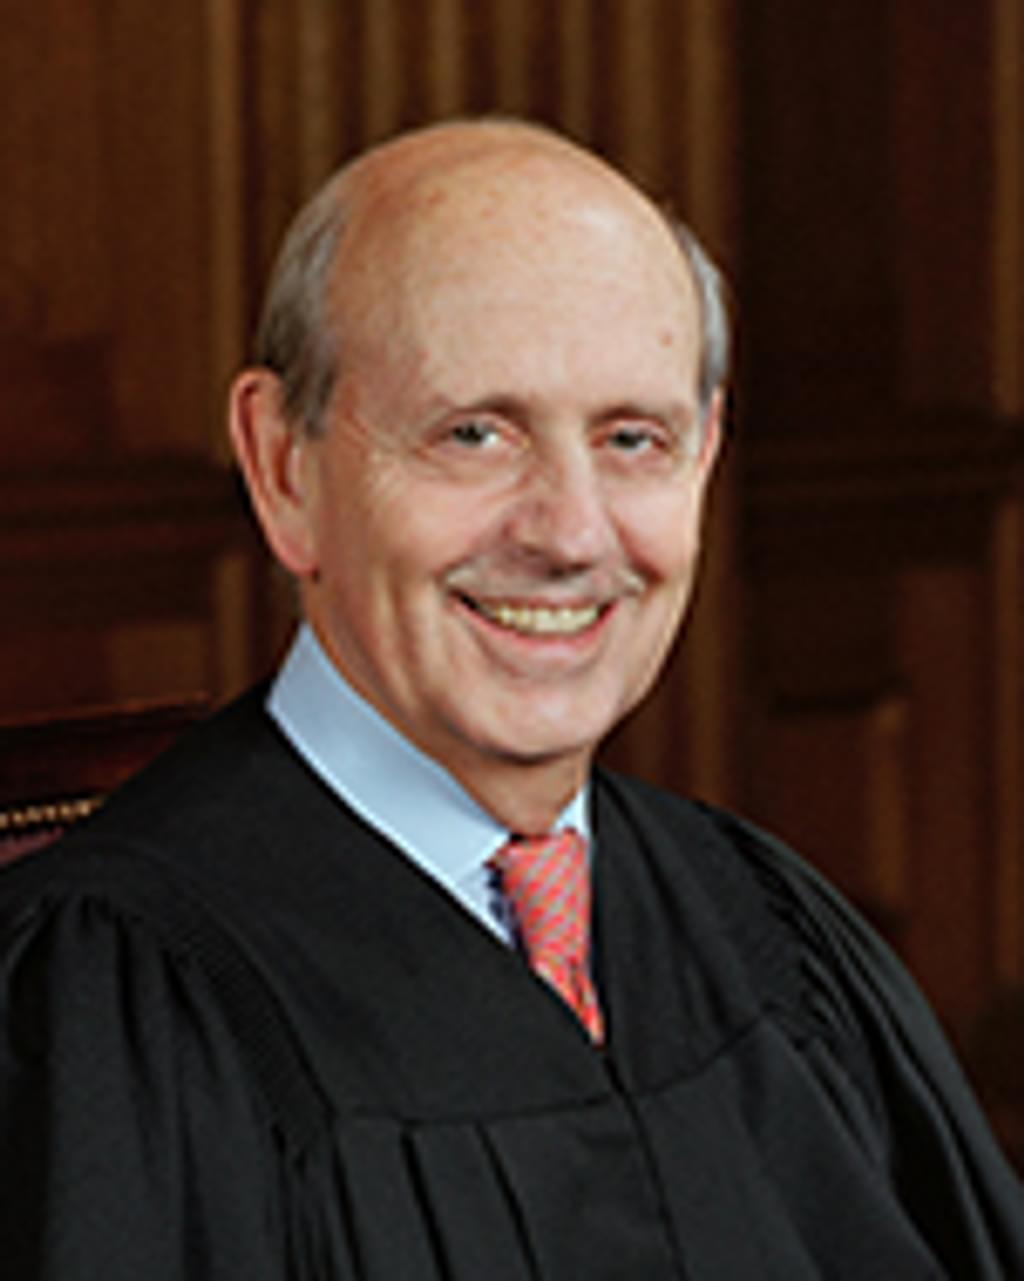 In Two Mississippi Cases, Justice Breyer Renews Call to Review Constitutionality of Death Penalty